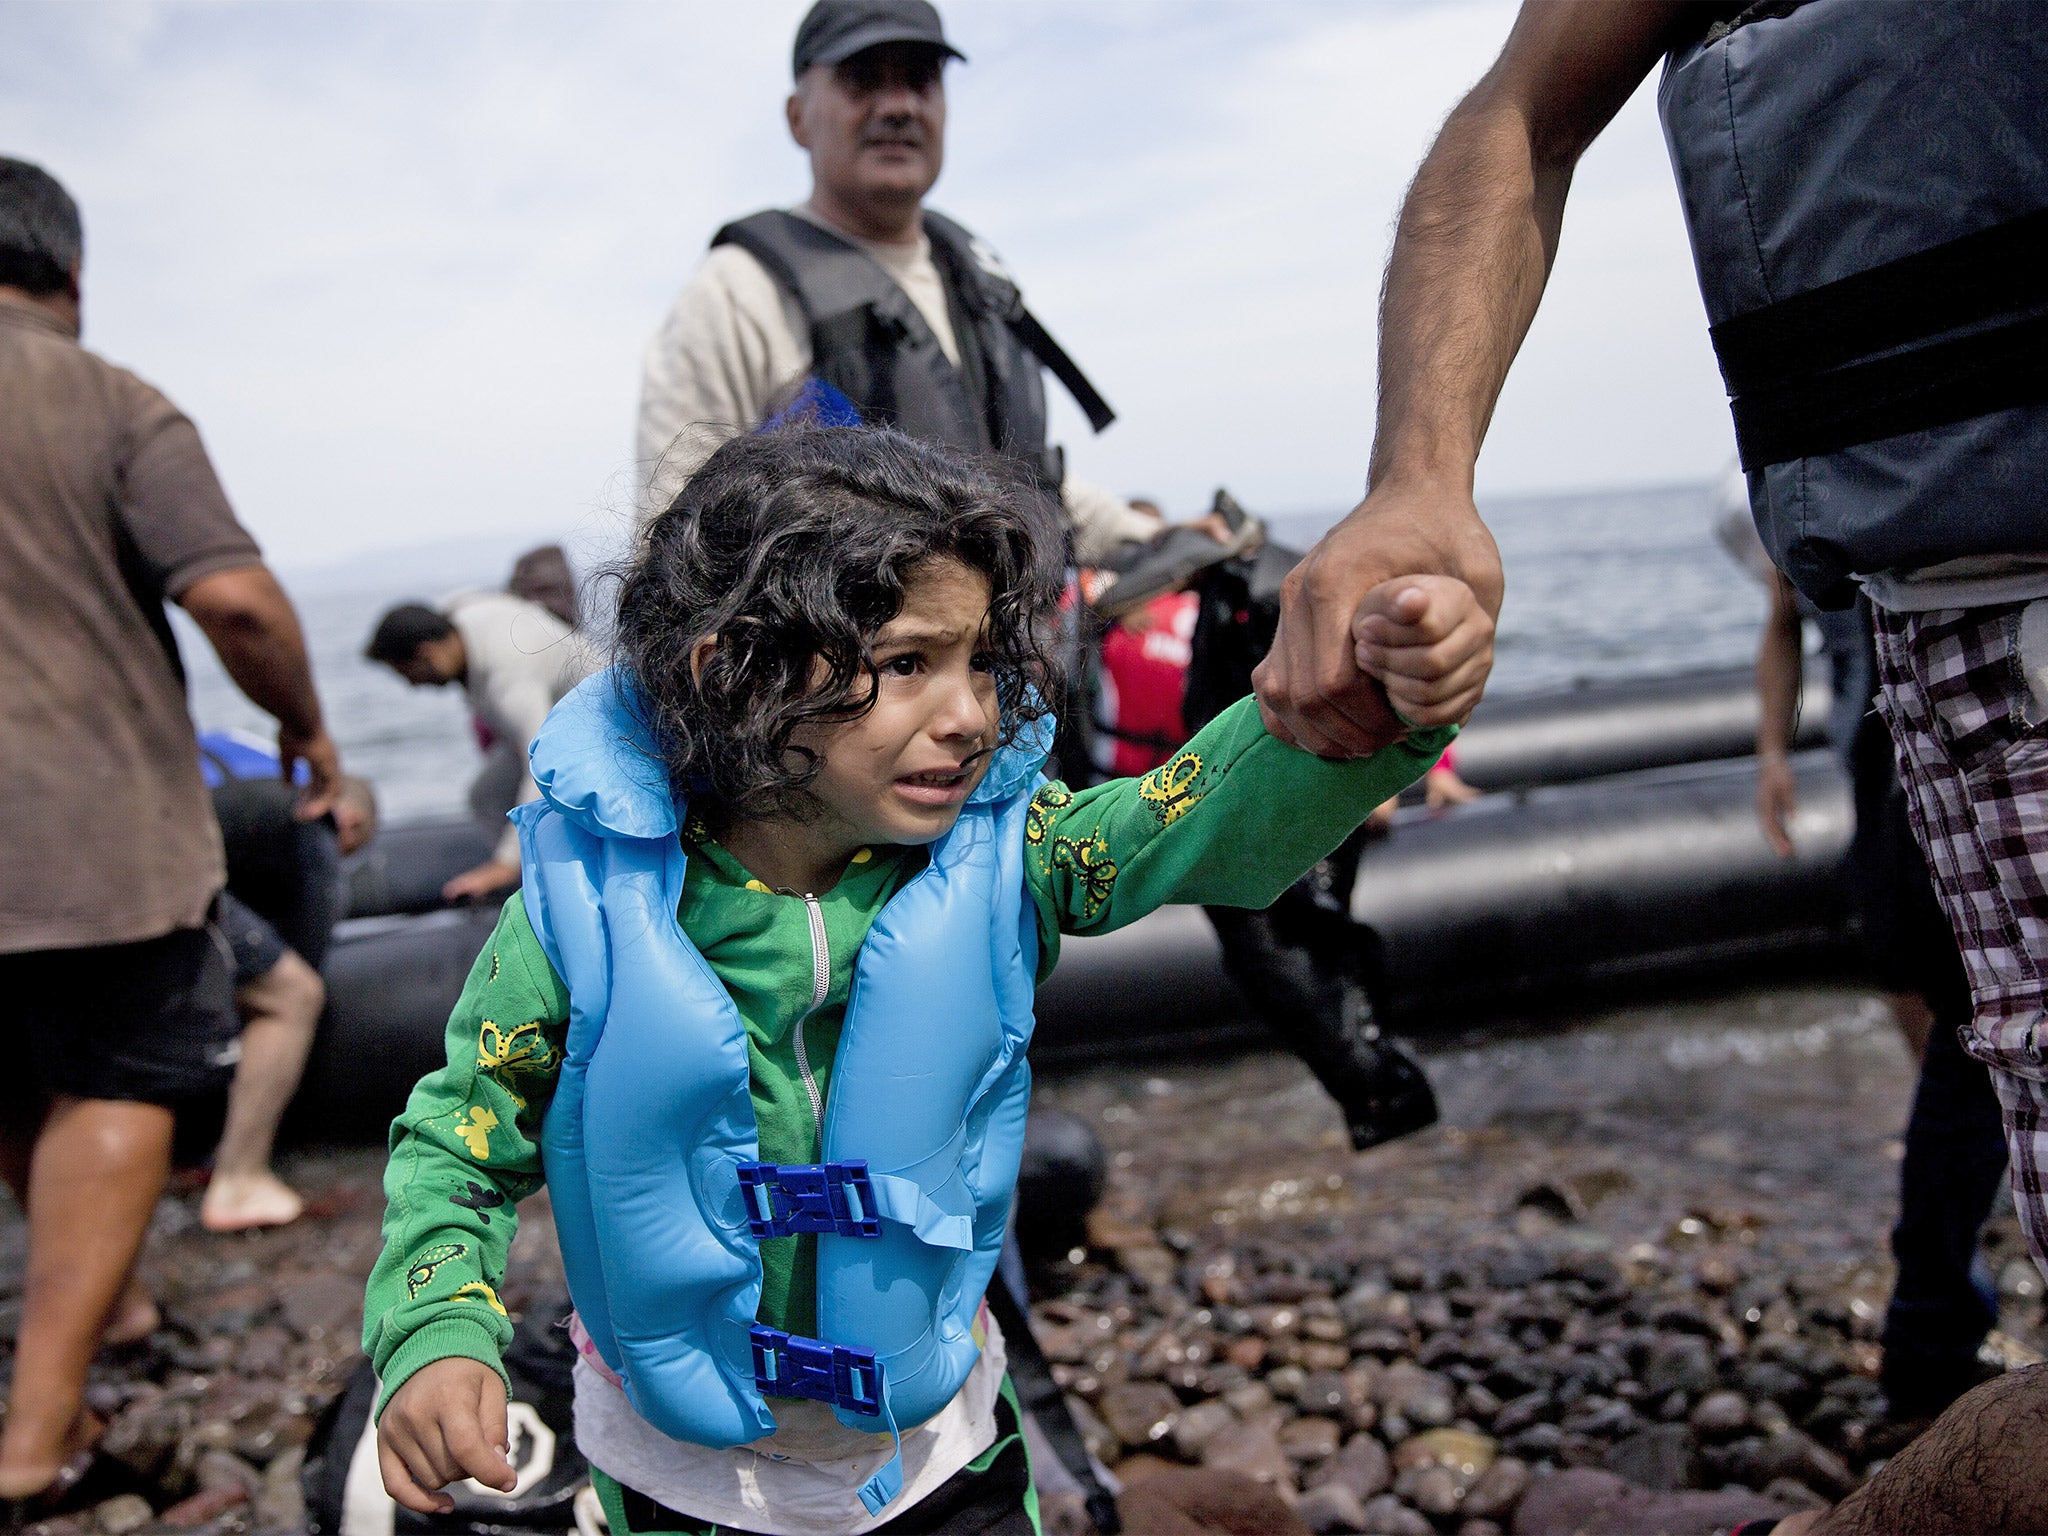 A young refugee girl is helped ashore as she arrives with others aboard a dinghy after crossing from Turkey to Lesbos island, Greece